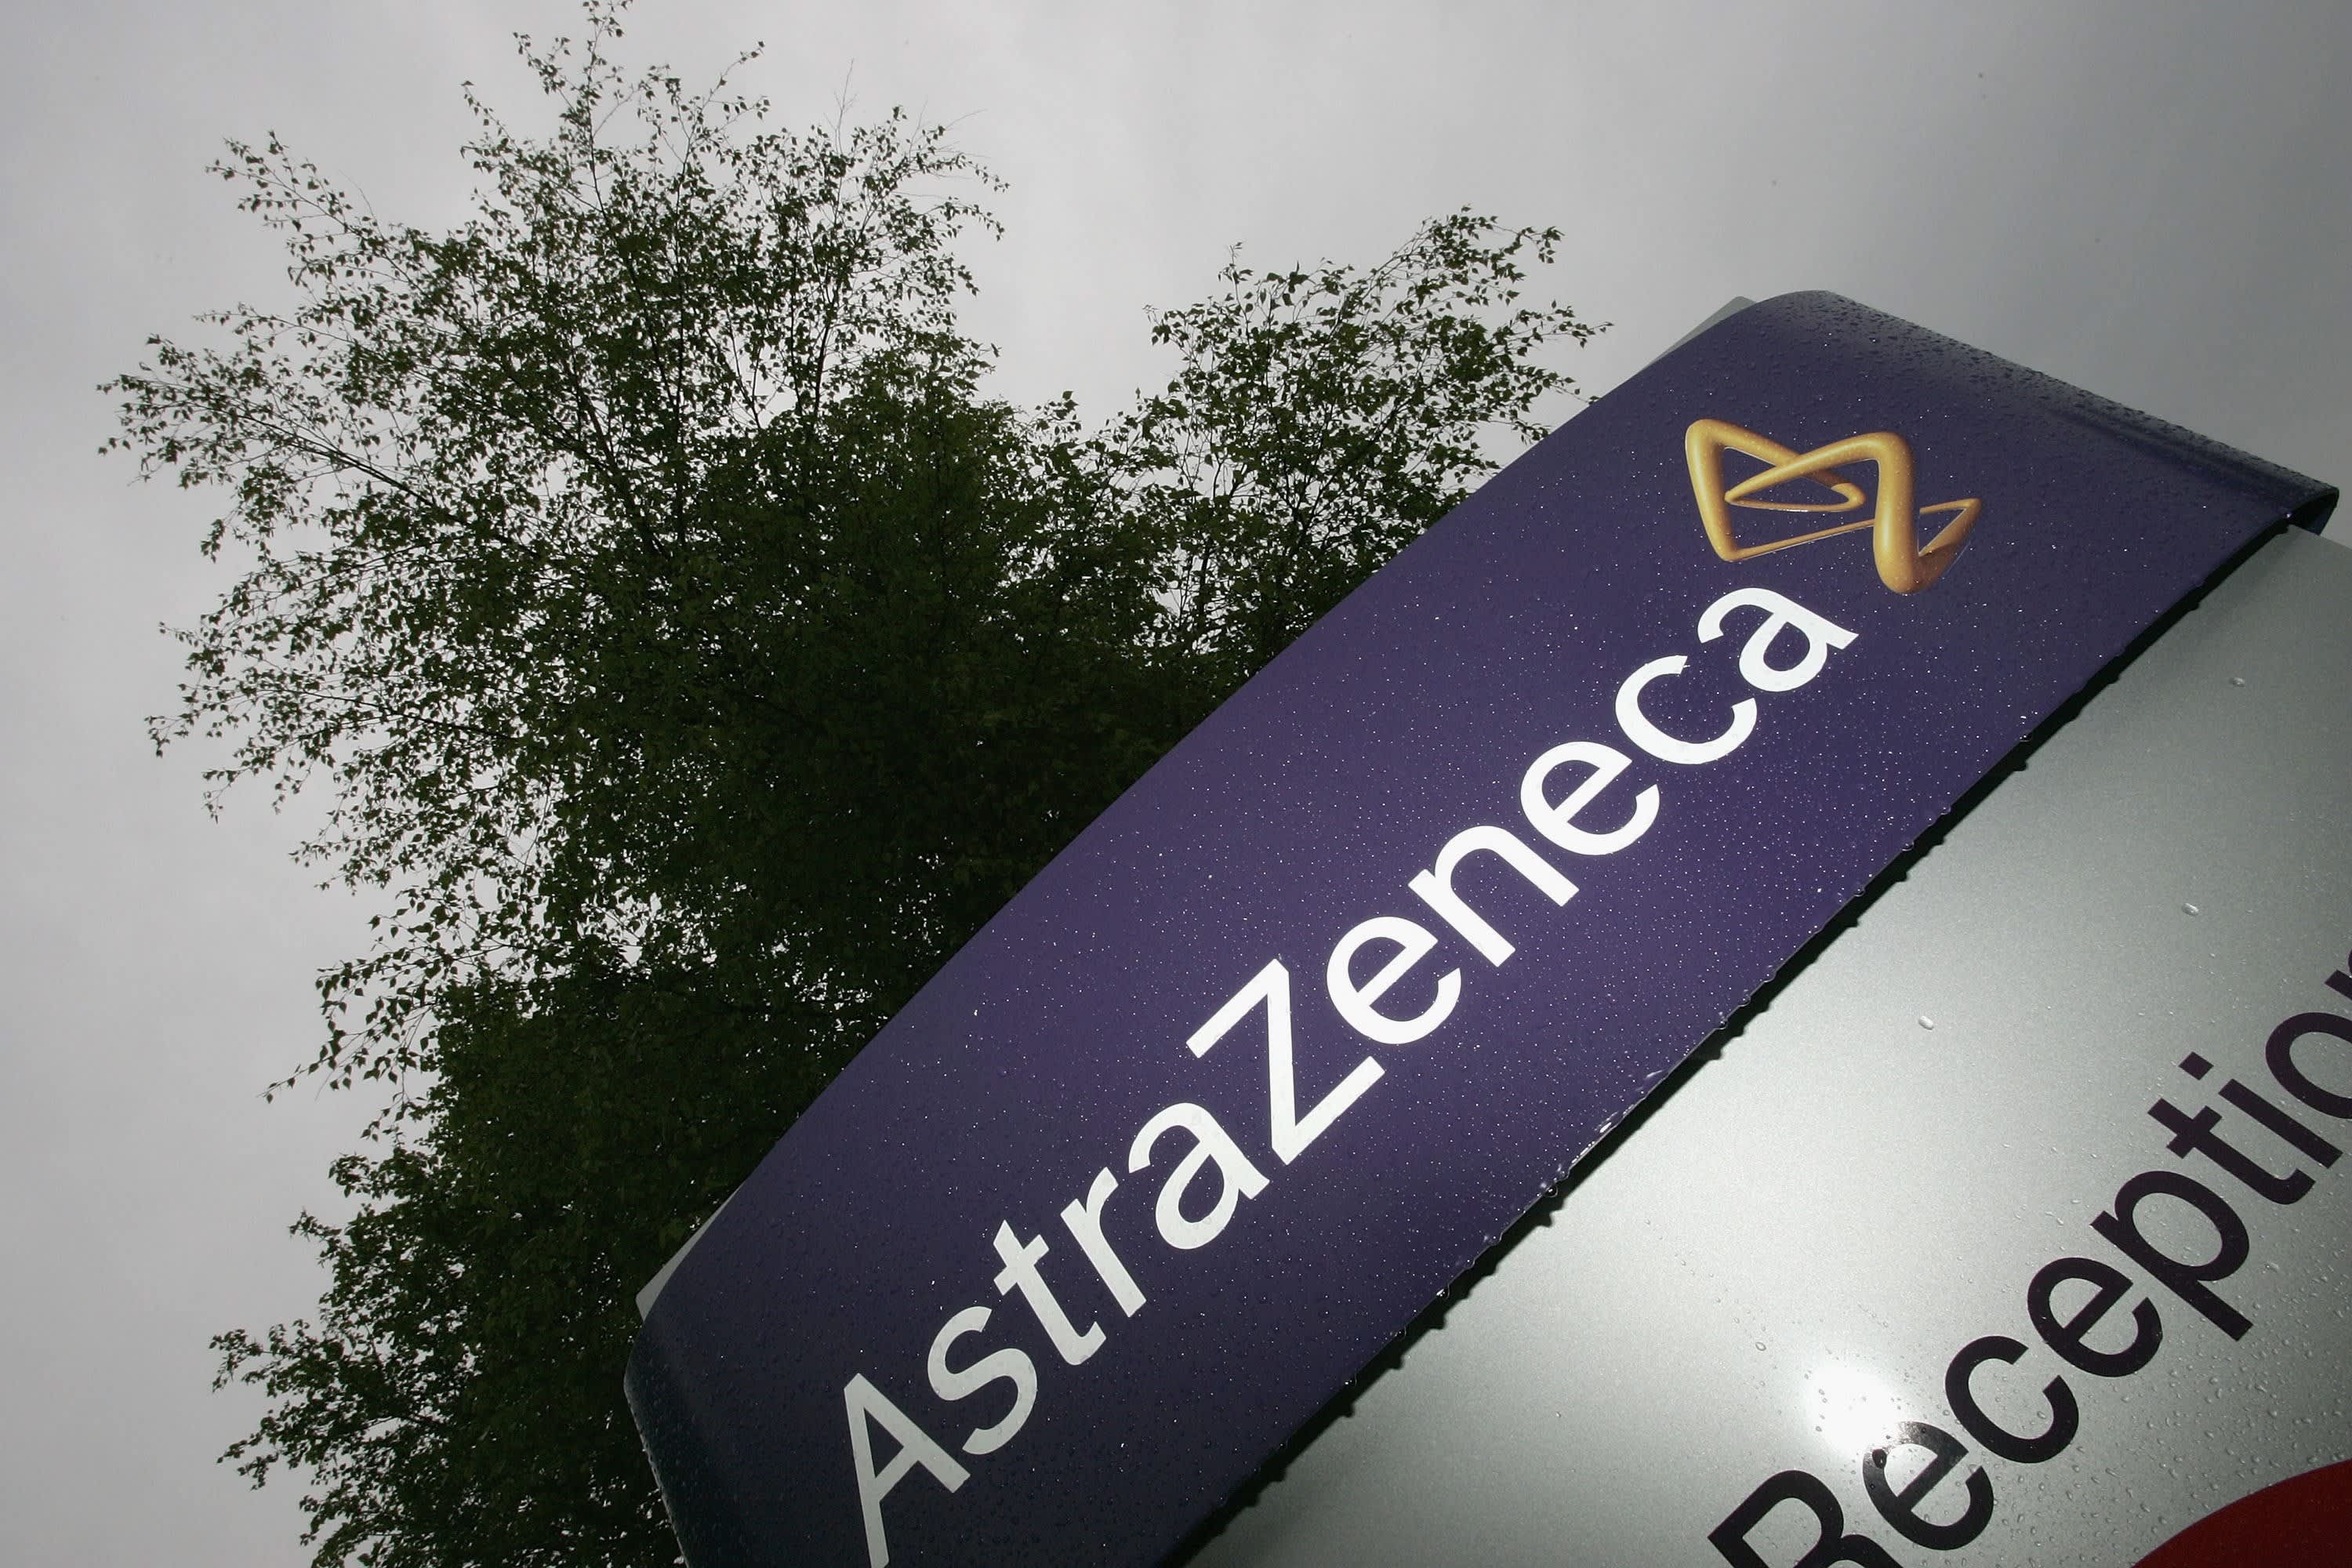 AstraZeneca vaccine booster works against omicron, Oxford lab study finds